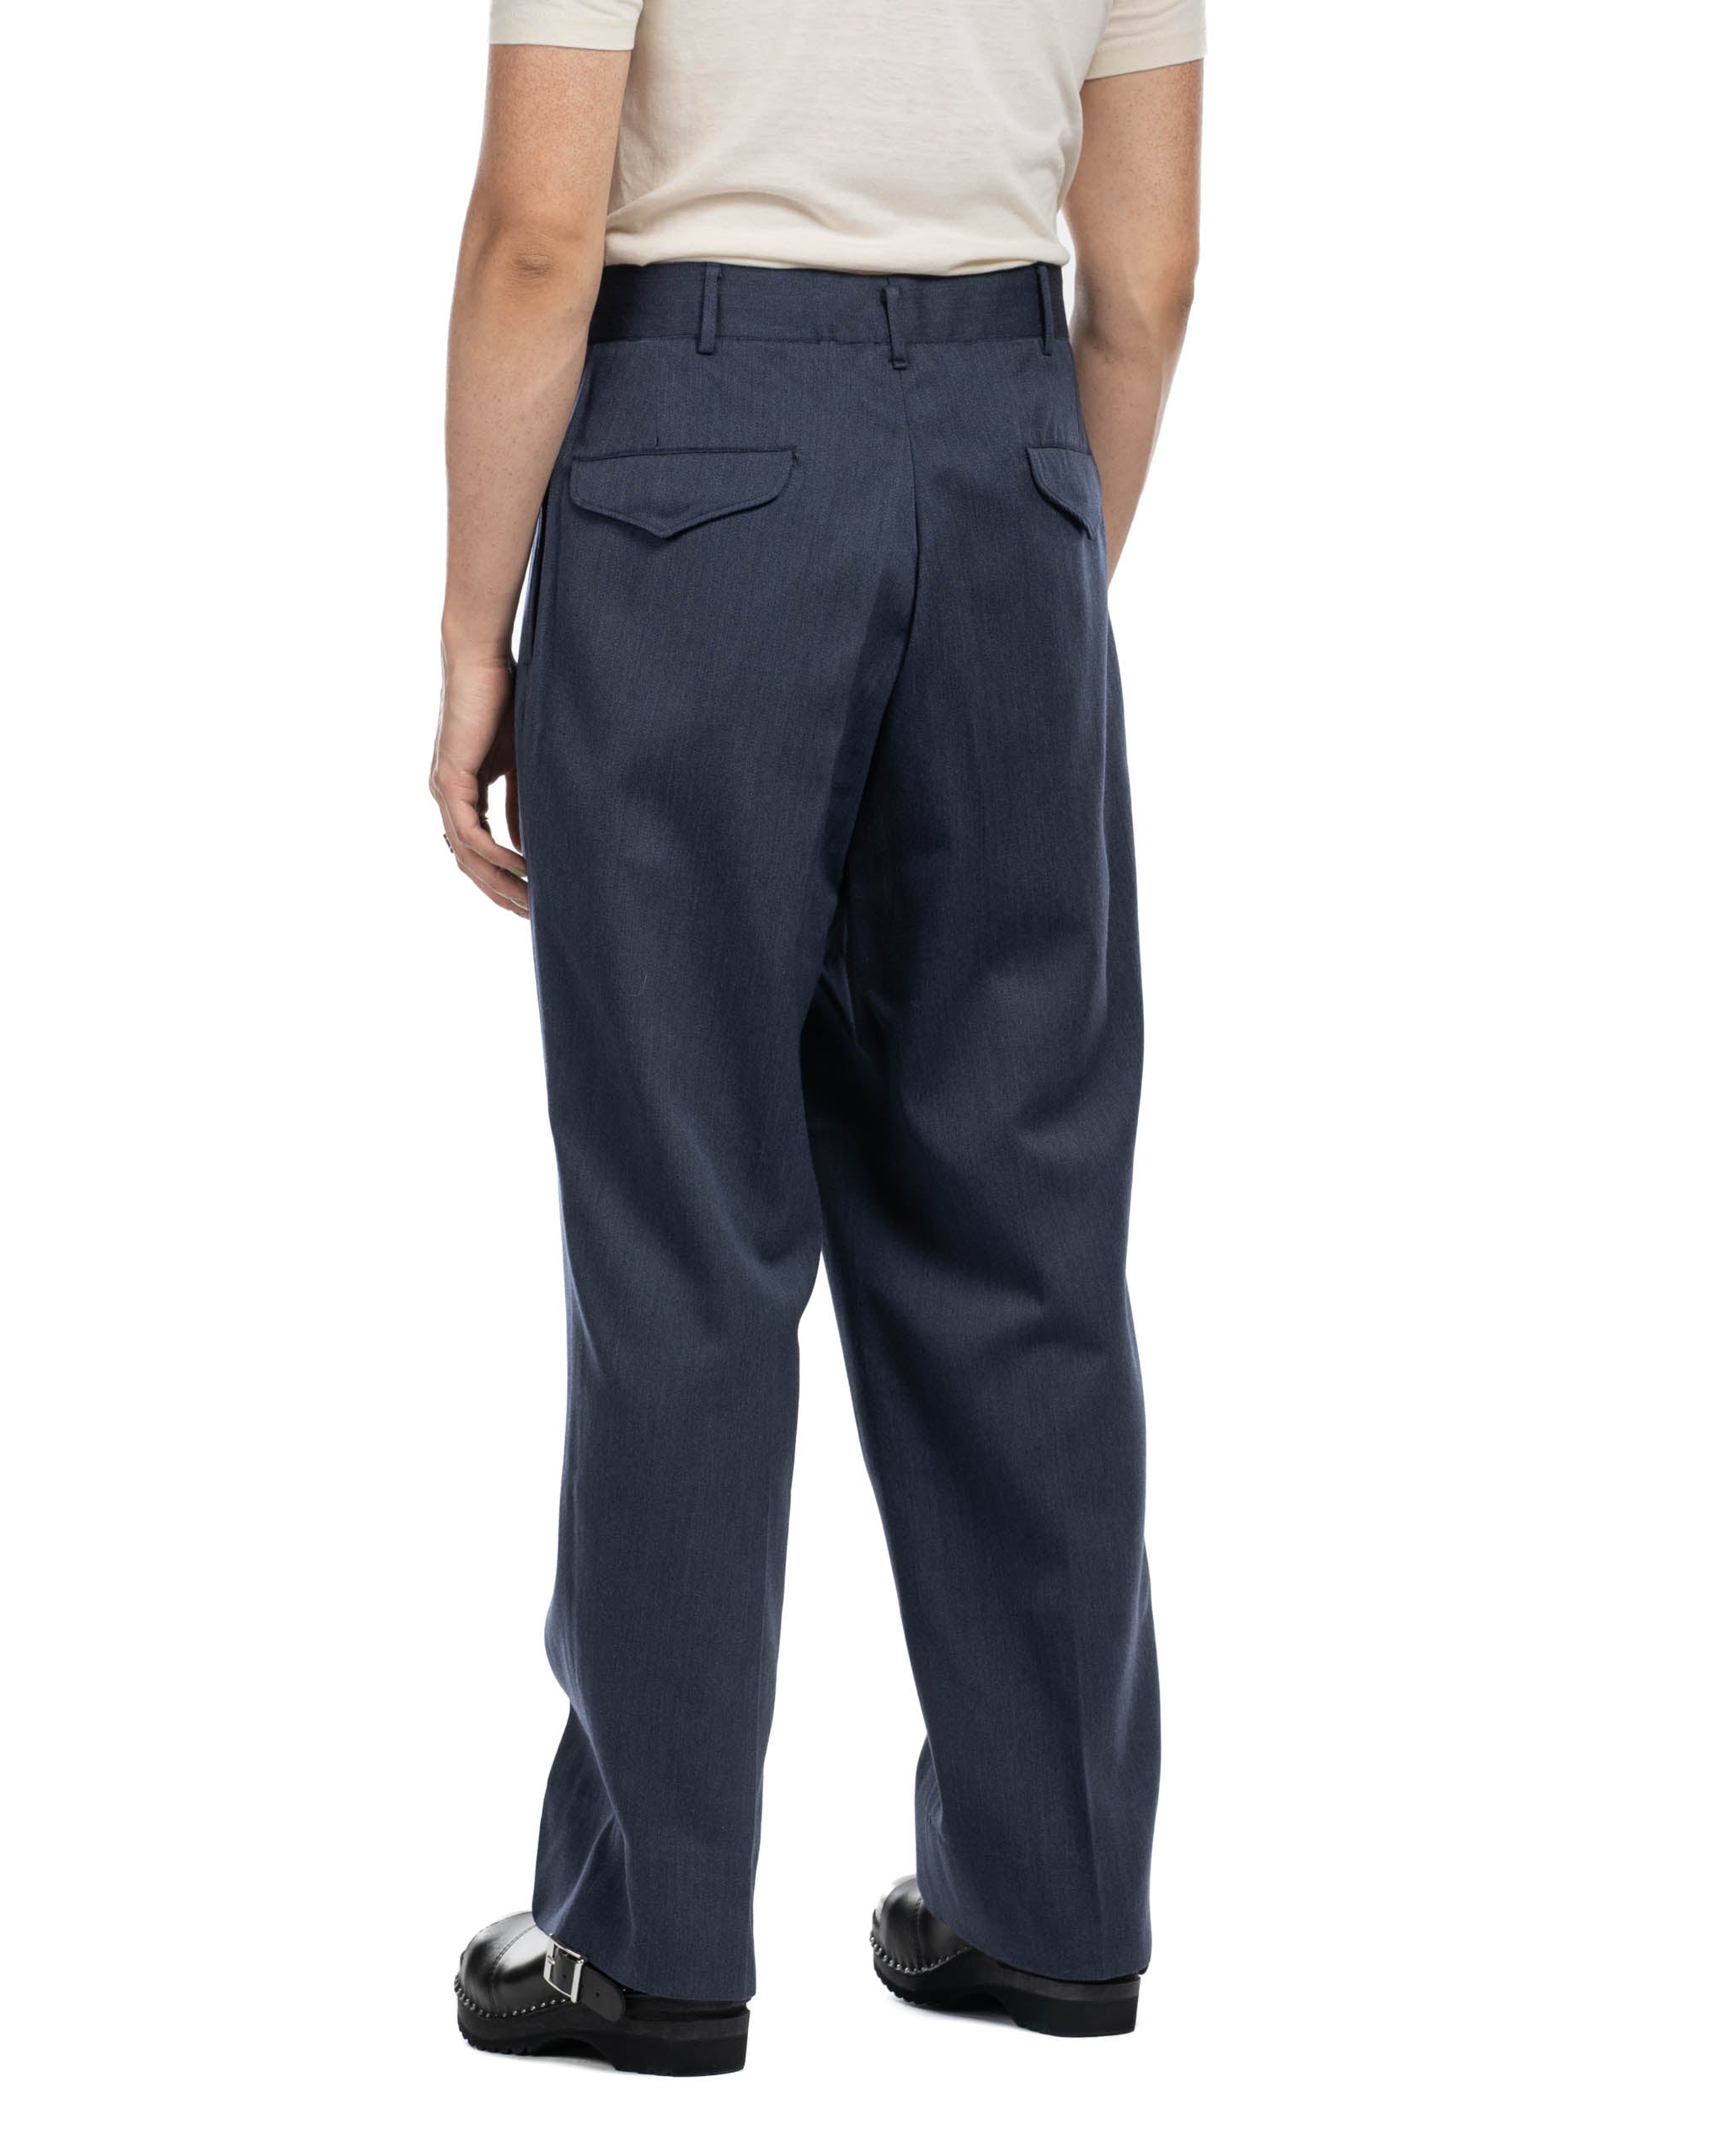 Levi's Formal Trousers & Hight Waist Pants for Men sale - discounted price  | FASHIOLA INDIA